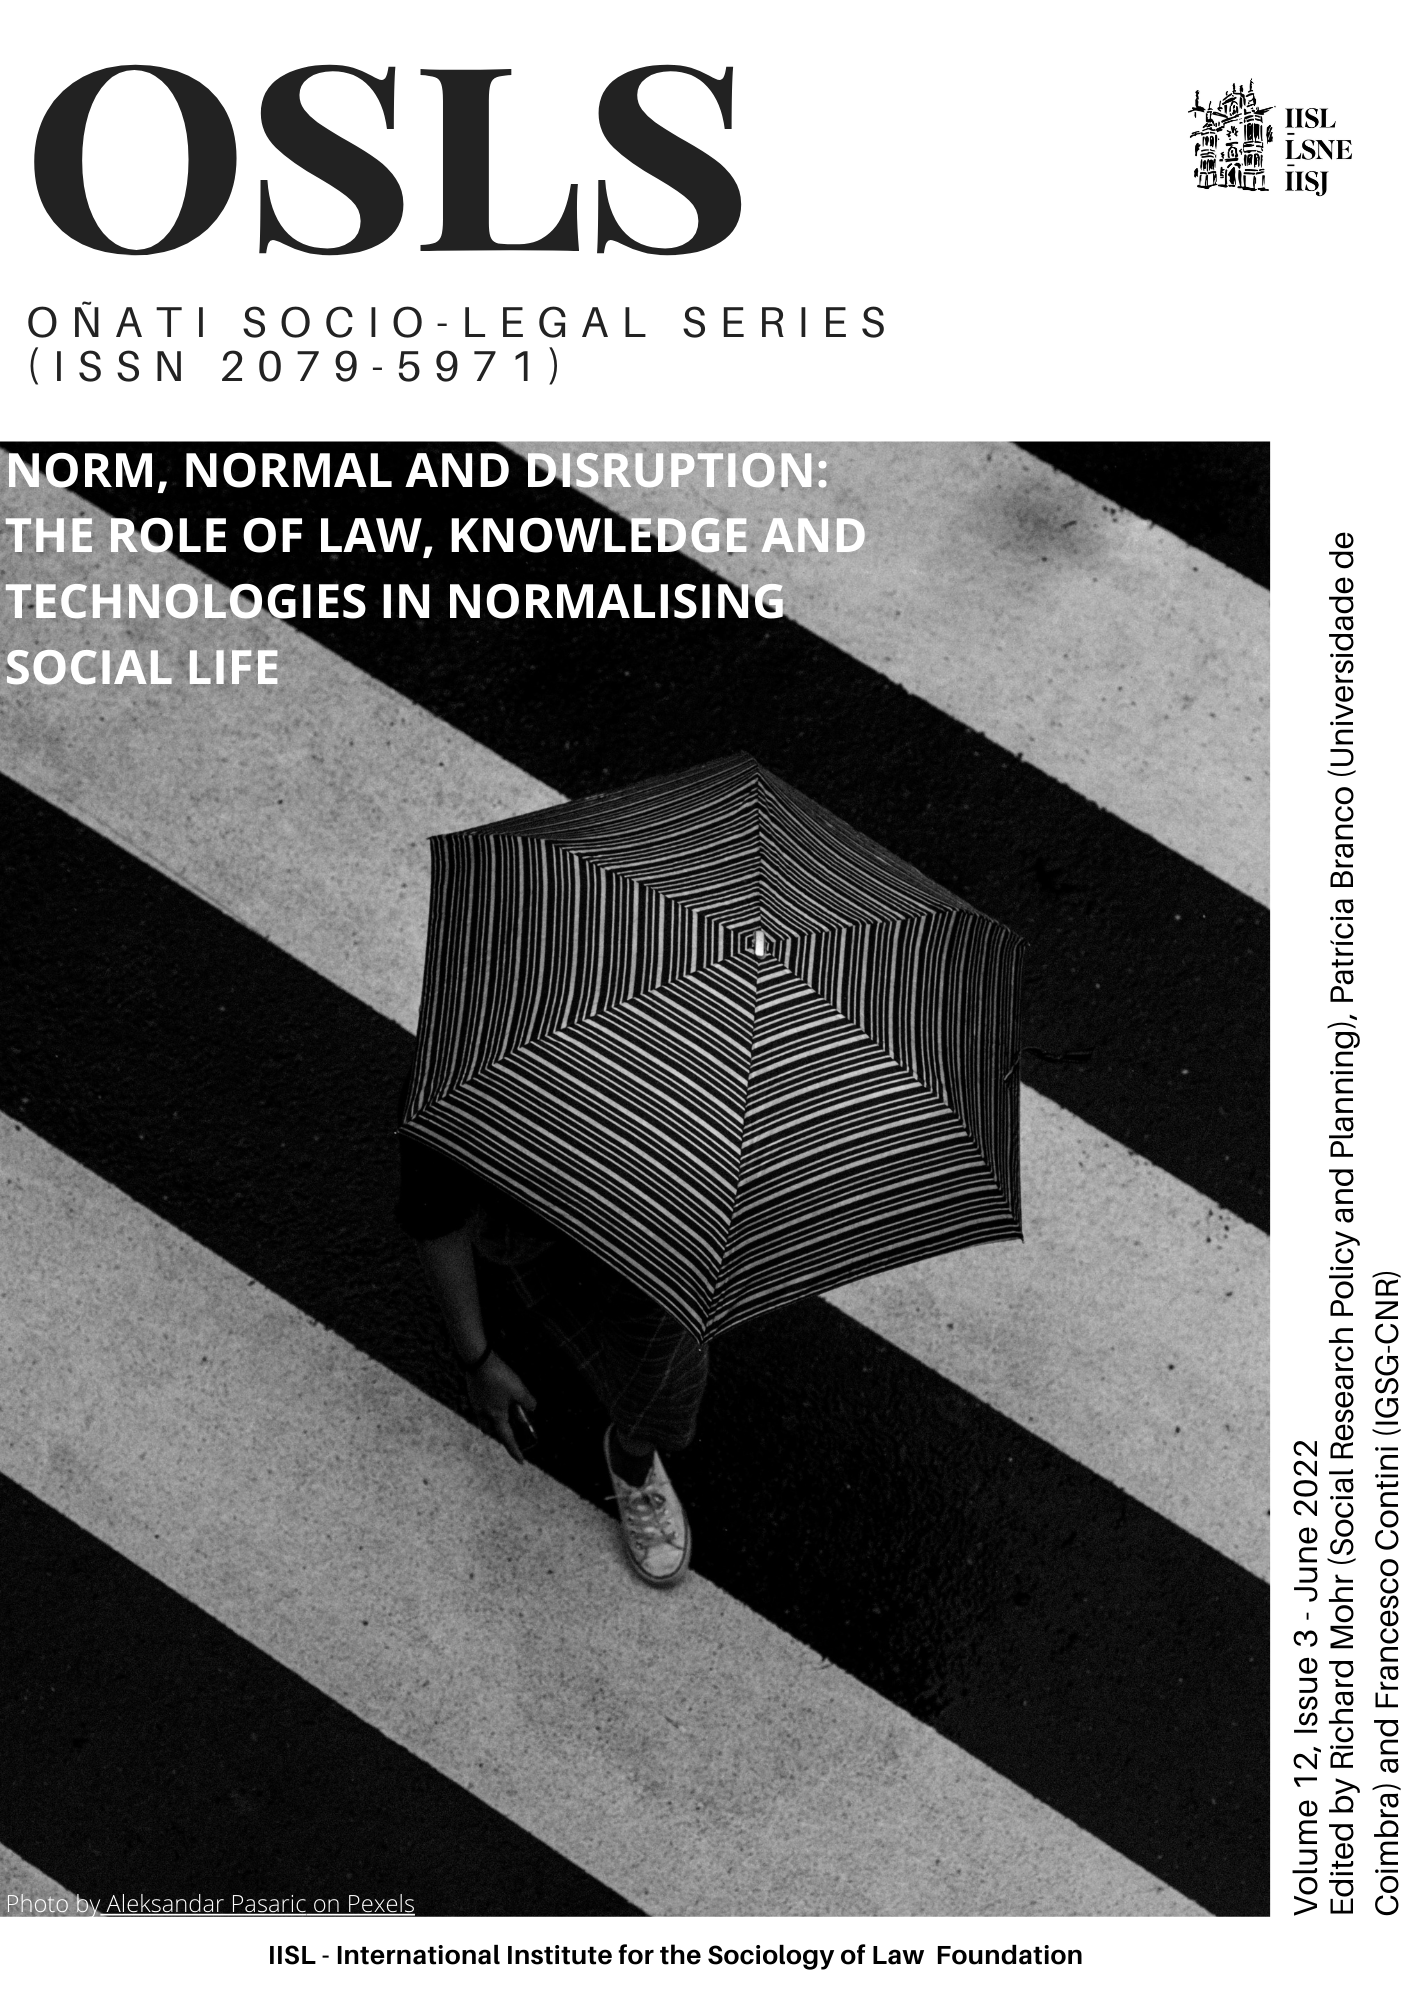 					View Vol. 12 No. 3 (2022): Norm, normal and disruption: The role of law, knowledge and technologies in normalising social life
				